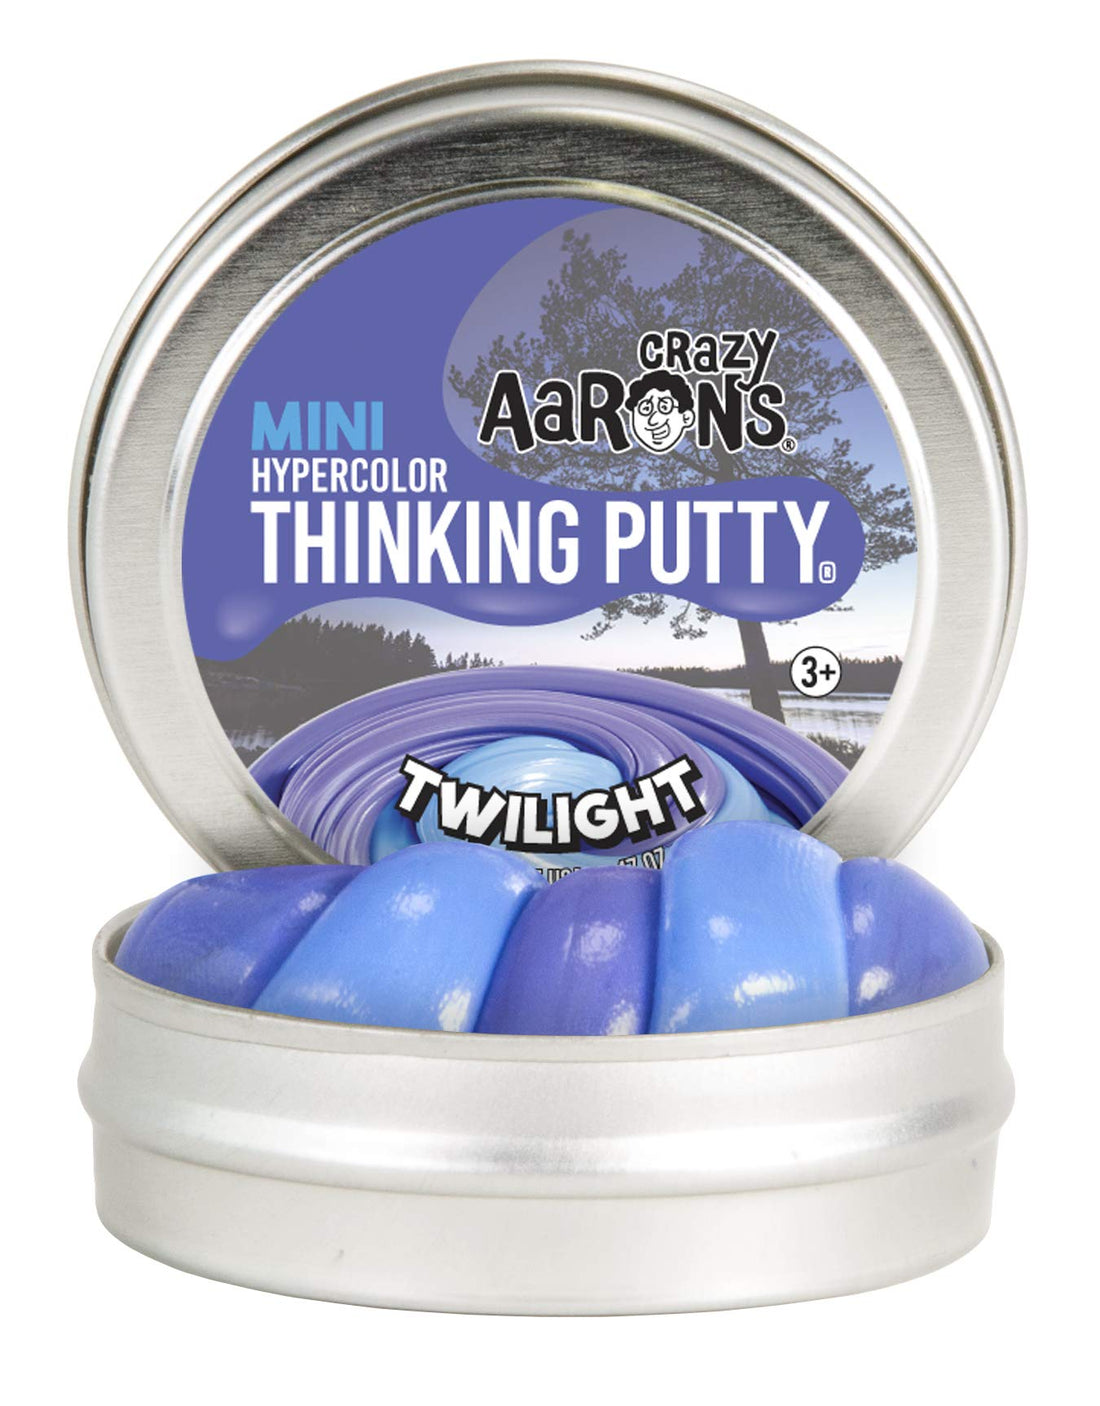 Crazy Aaron Thinking Putty, Twilight, 2'' L, Hyper Color